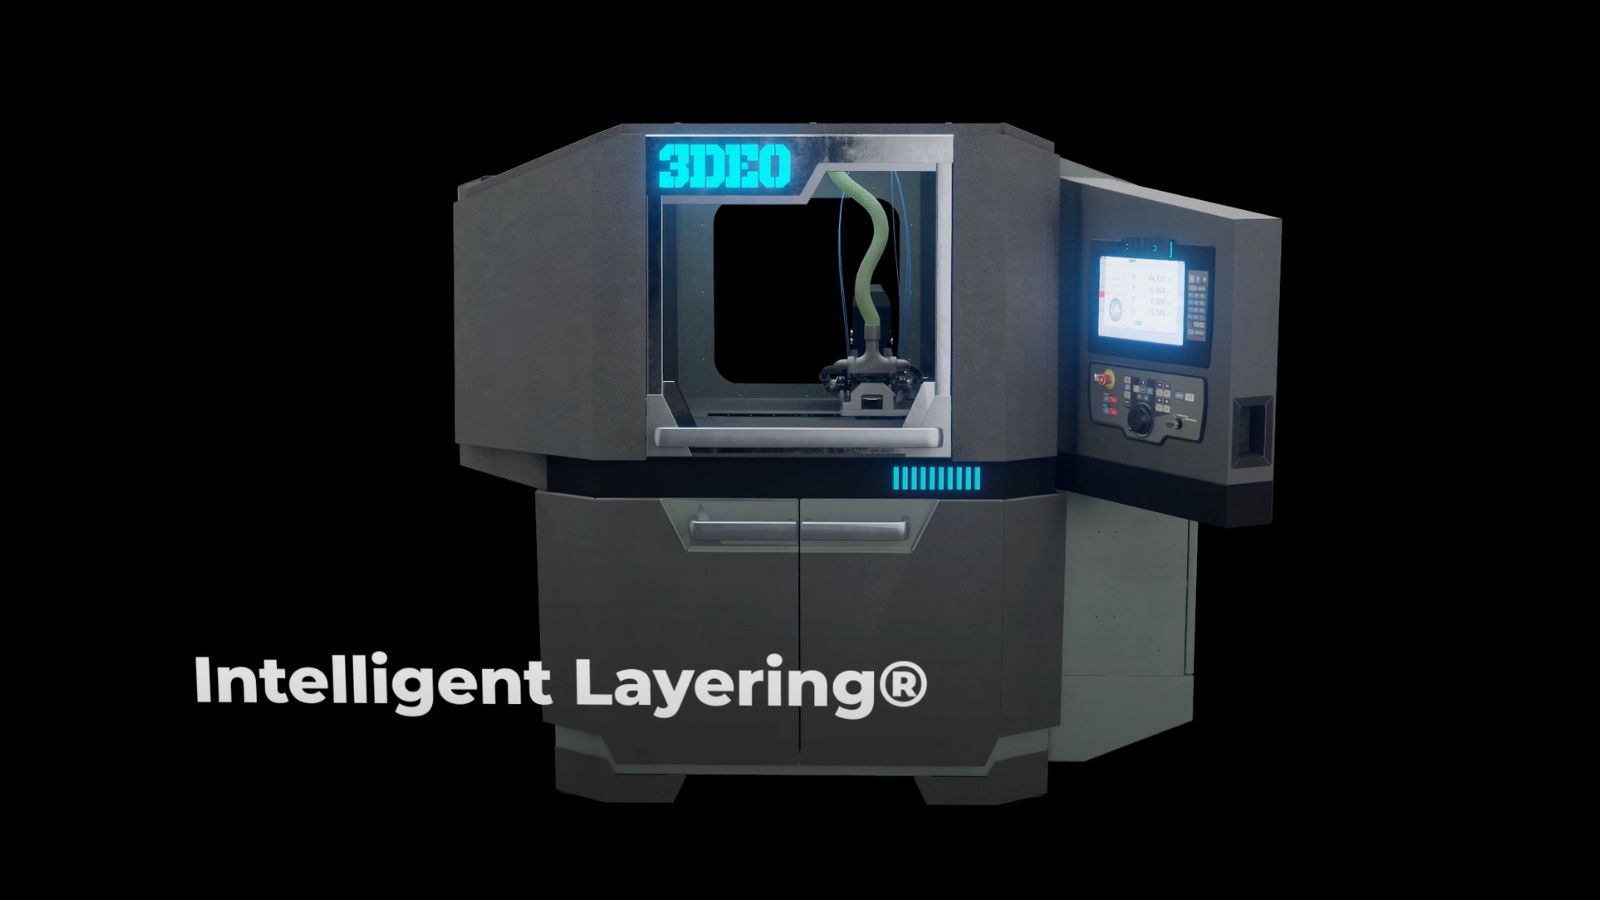 Low-Cost Production Metal 3D Printing: 3DEO’s Intelligent Layering®